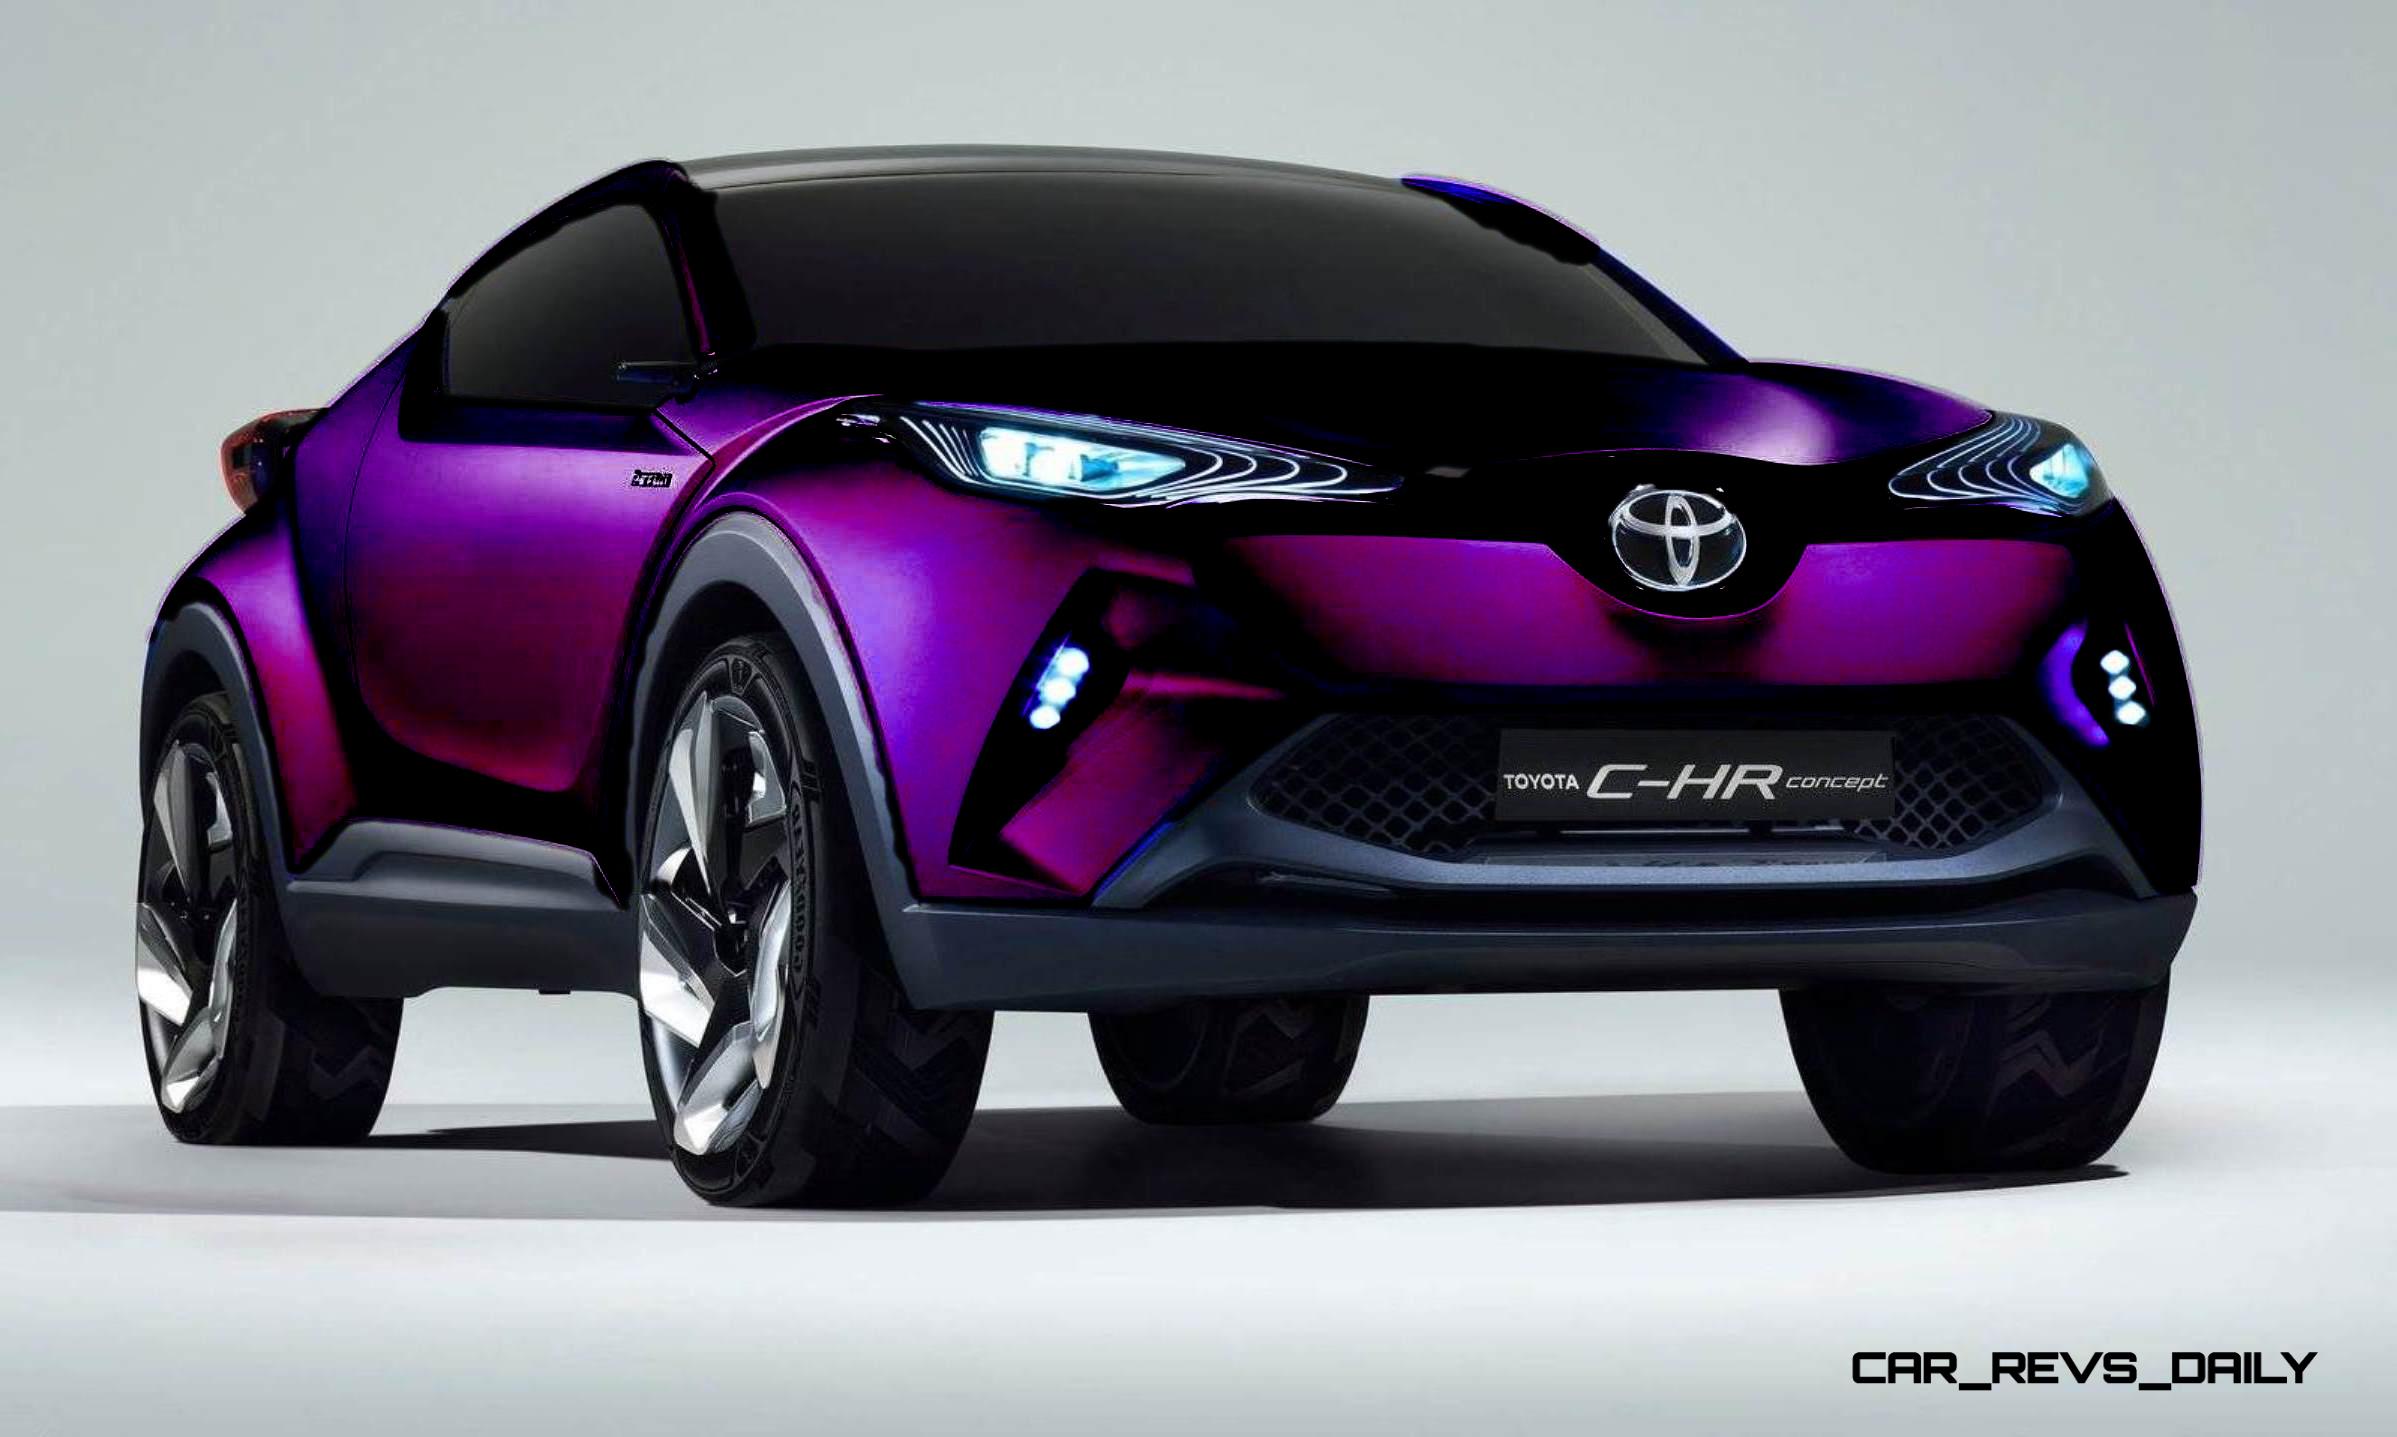 Toyota C-HR Concept: A Hybrid Crossover For Smart Drivers 